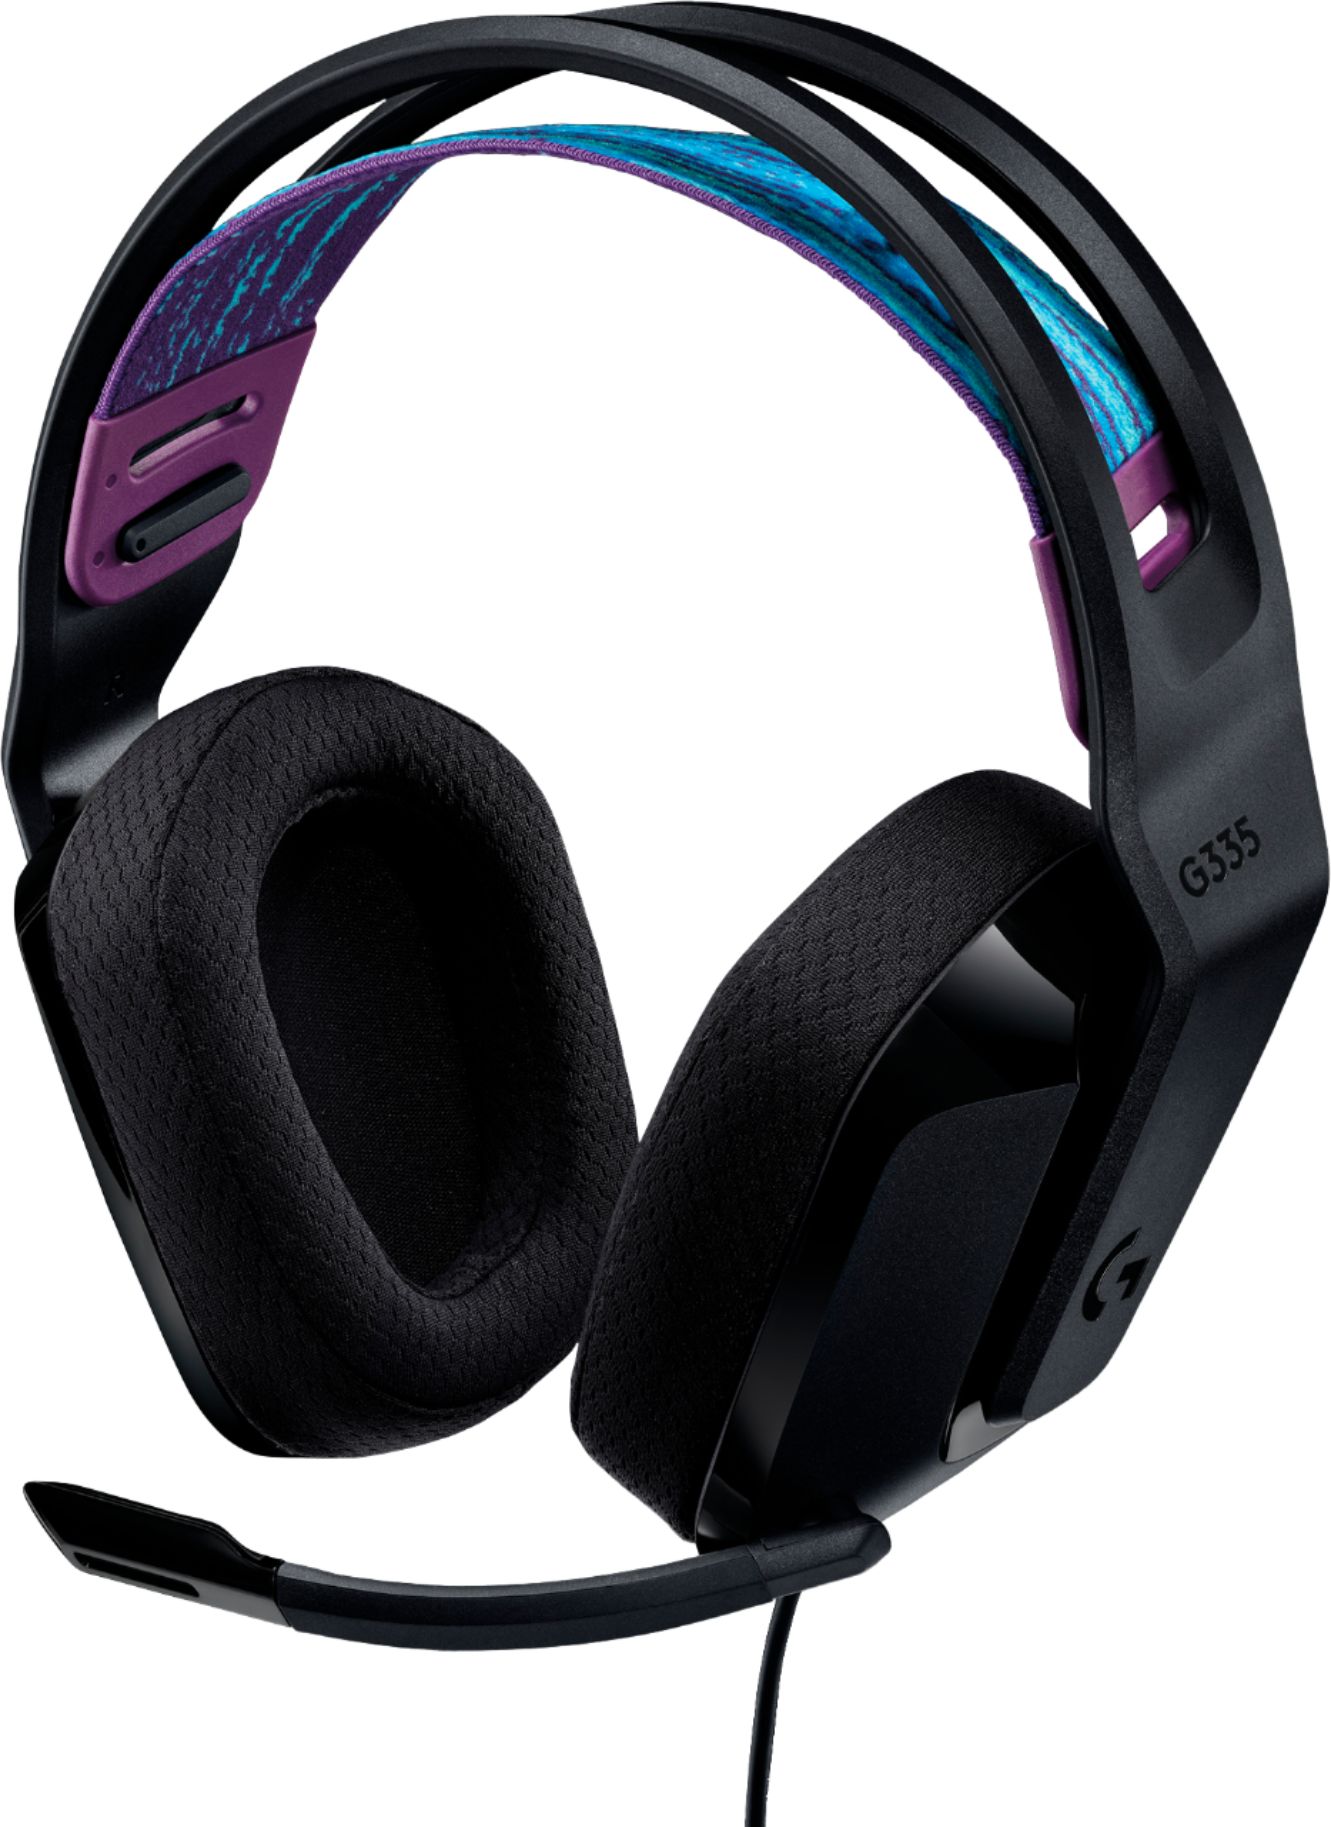 Logitech Gaming Headset: The Ultimate Gaming Experience